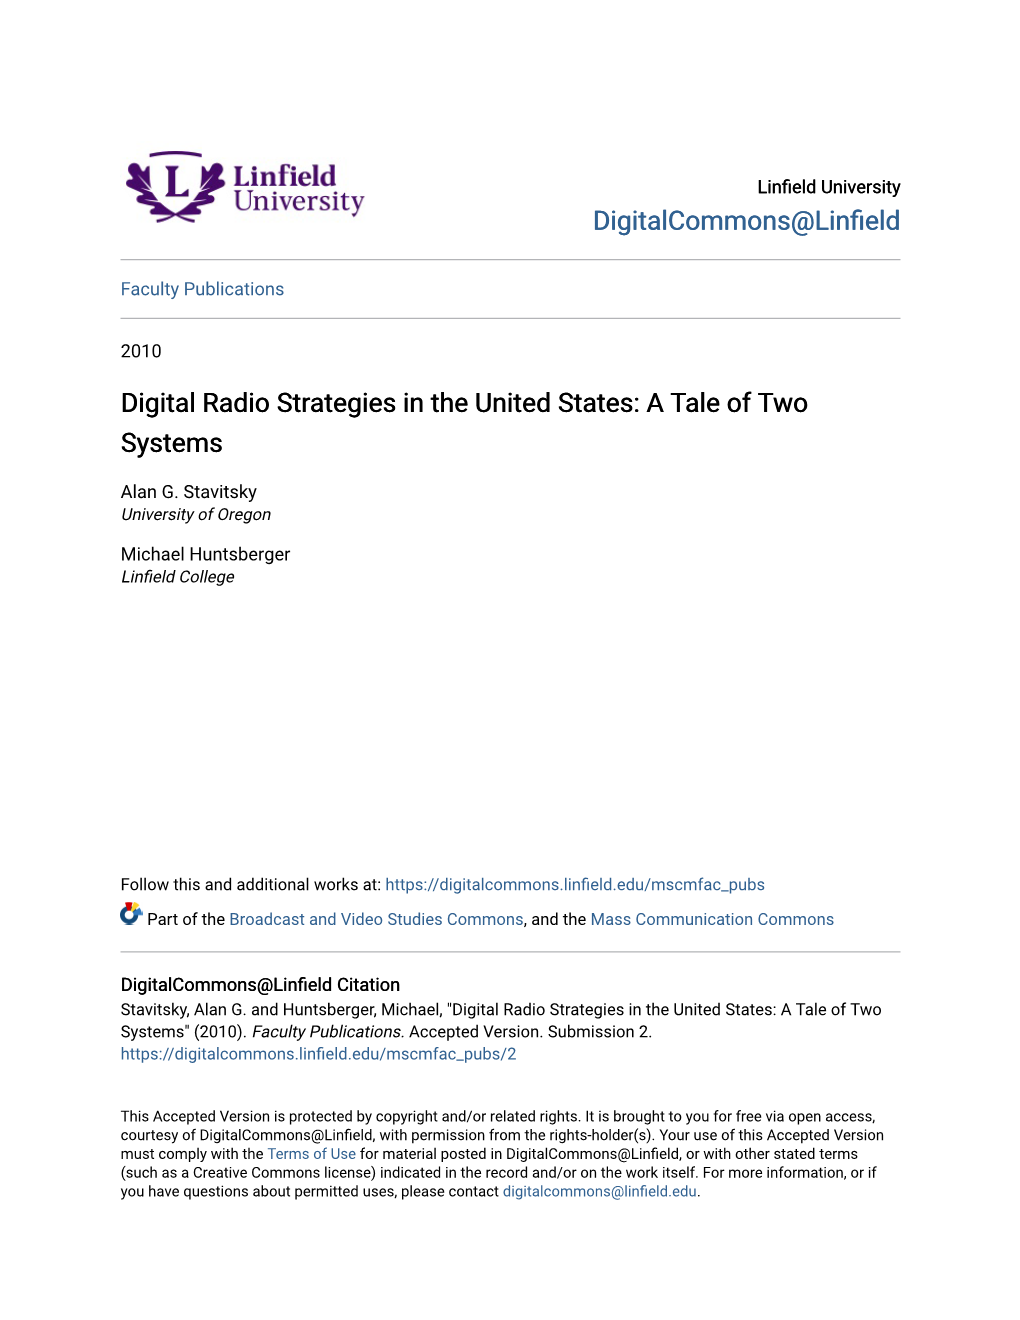 Digital Radio Strategies in the United States: a Tale of Two Systems